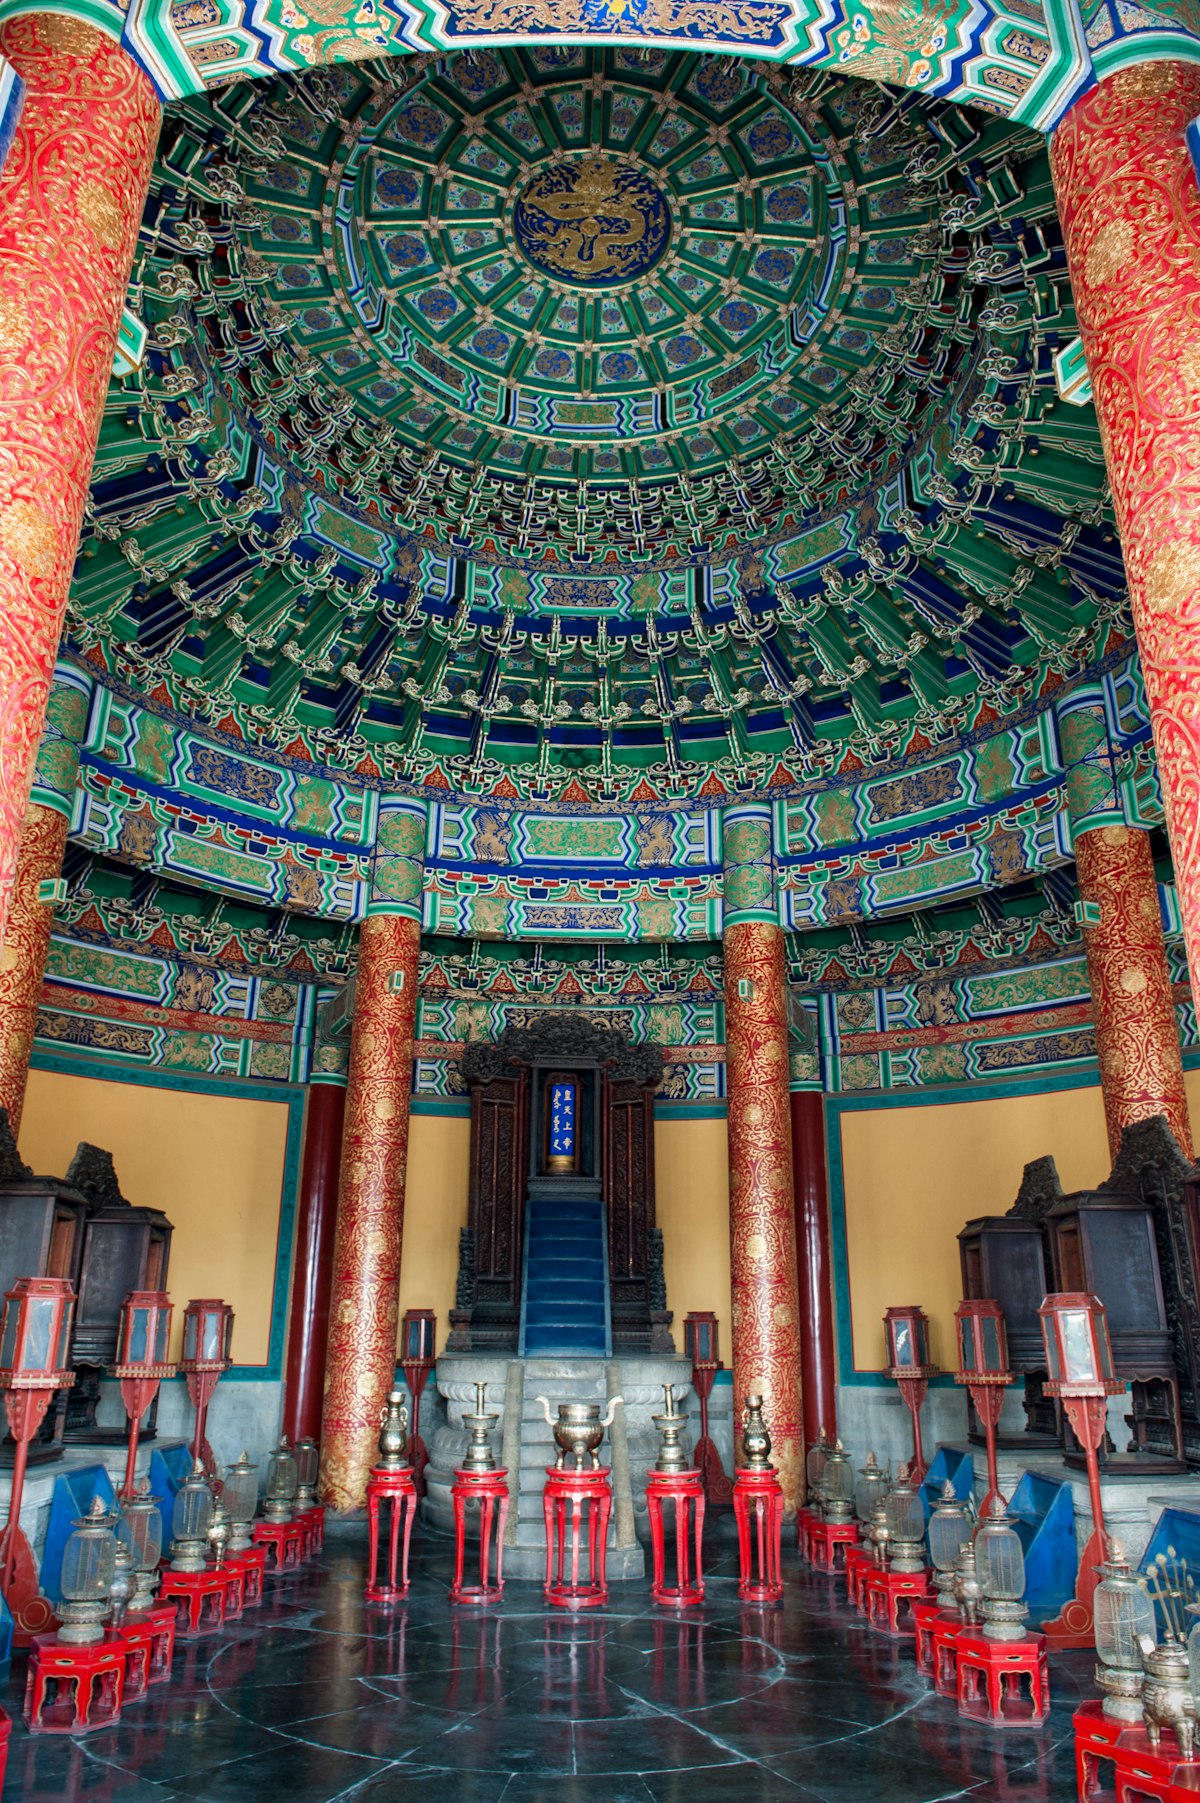 Inside the Imperial Vault of Heaven at the Temple of Heaven Park.
